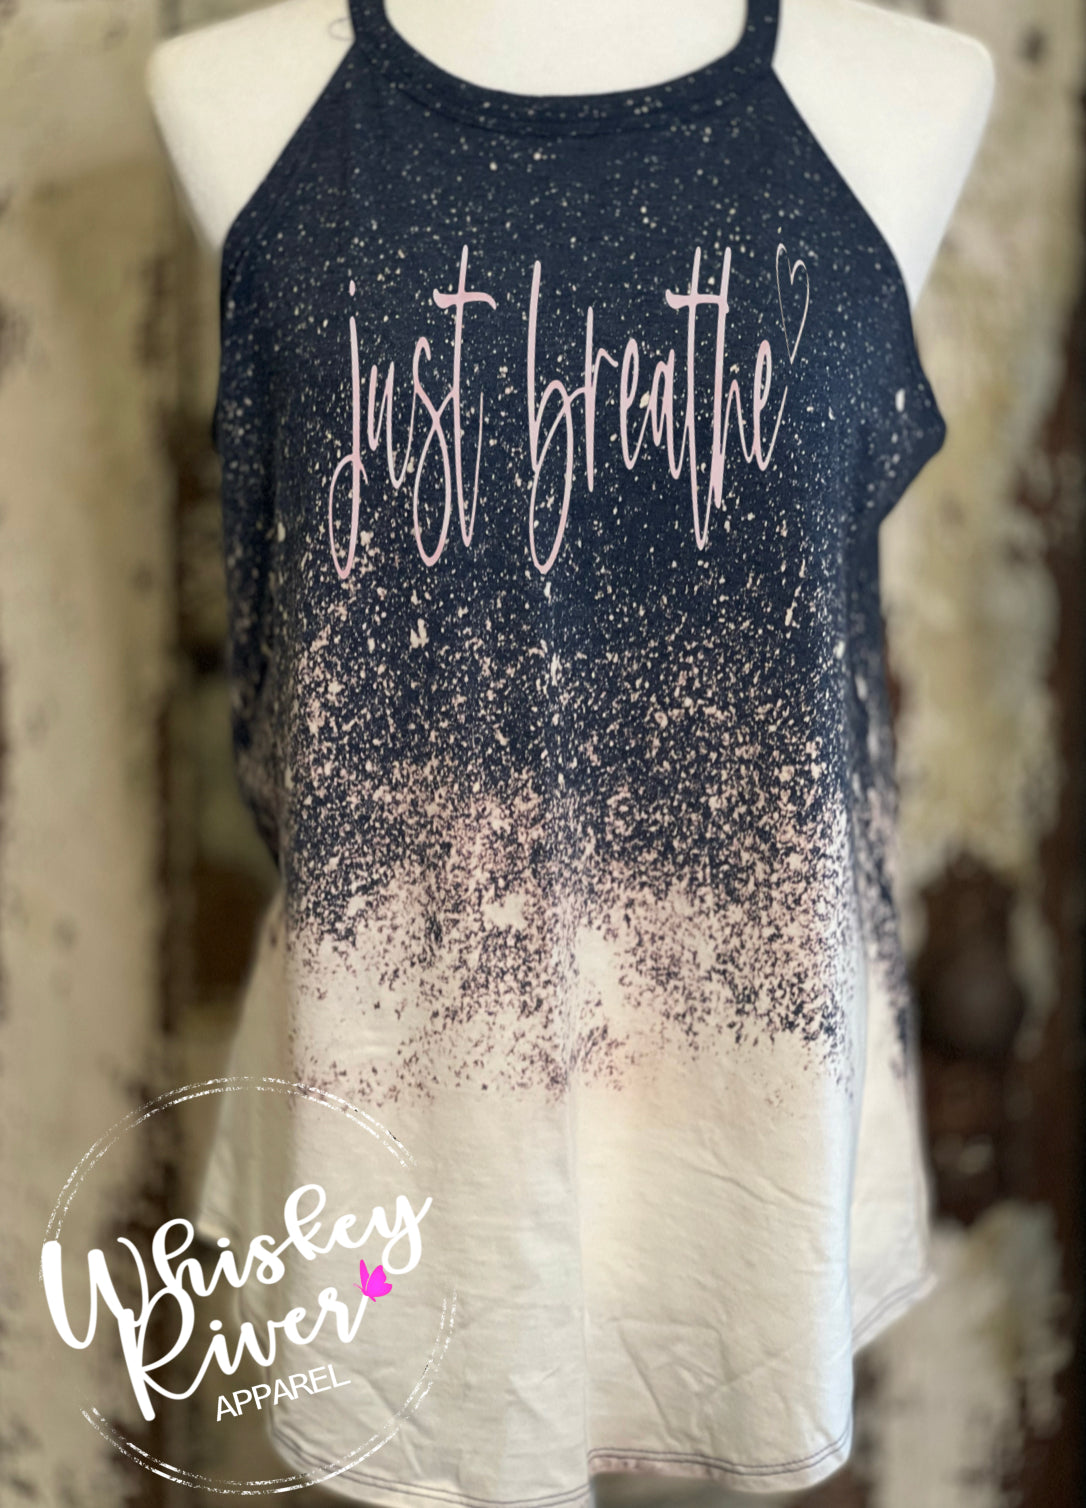 Just Breathe Bleached Tank